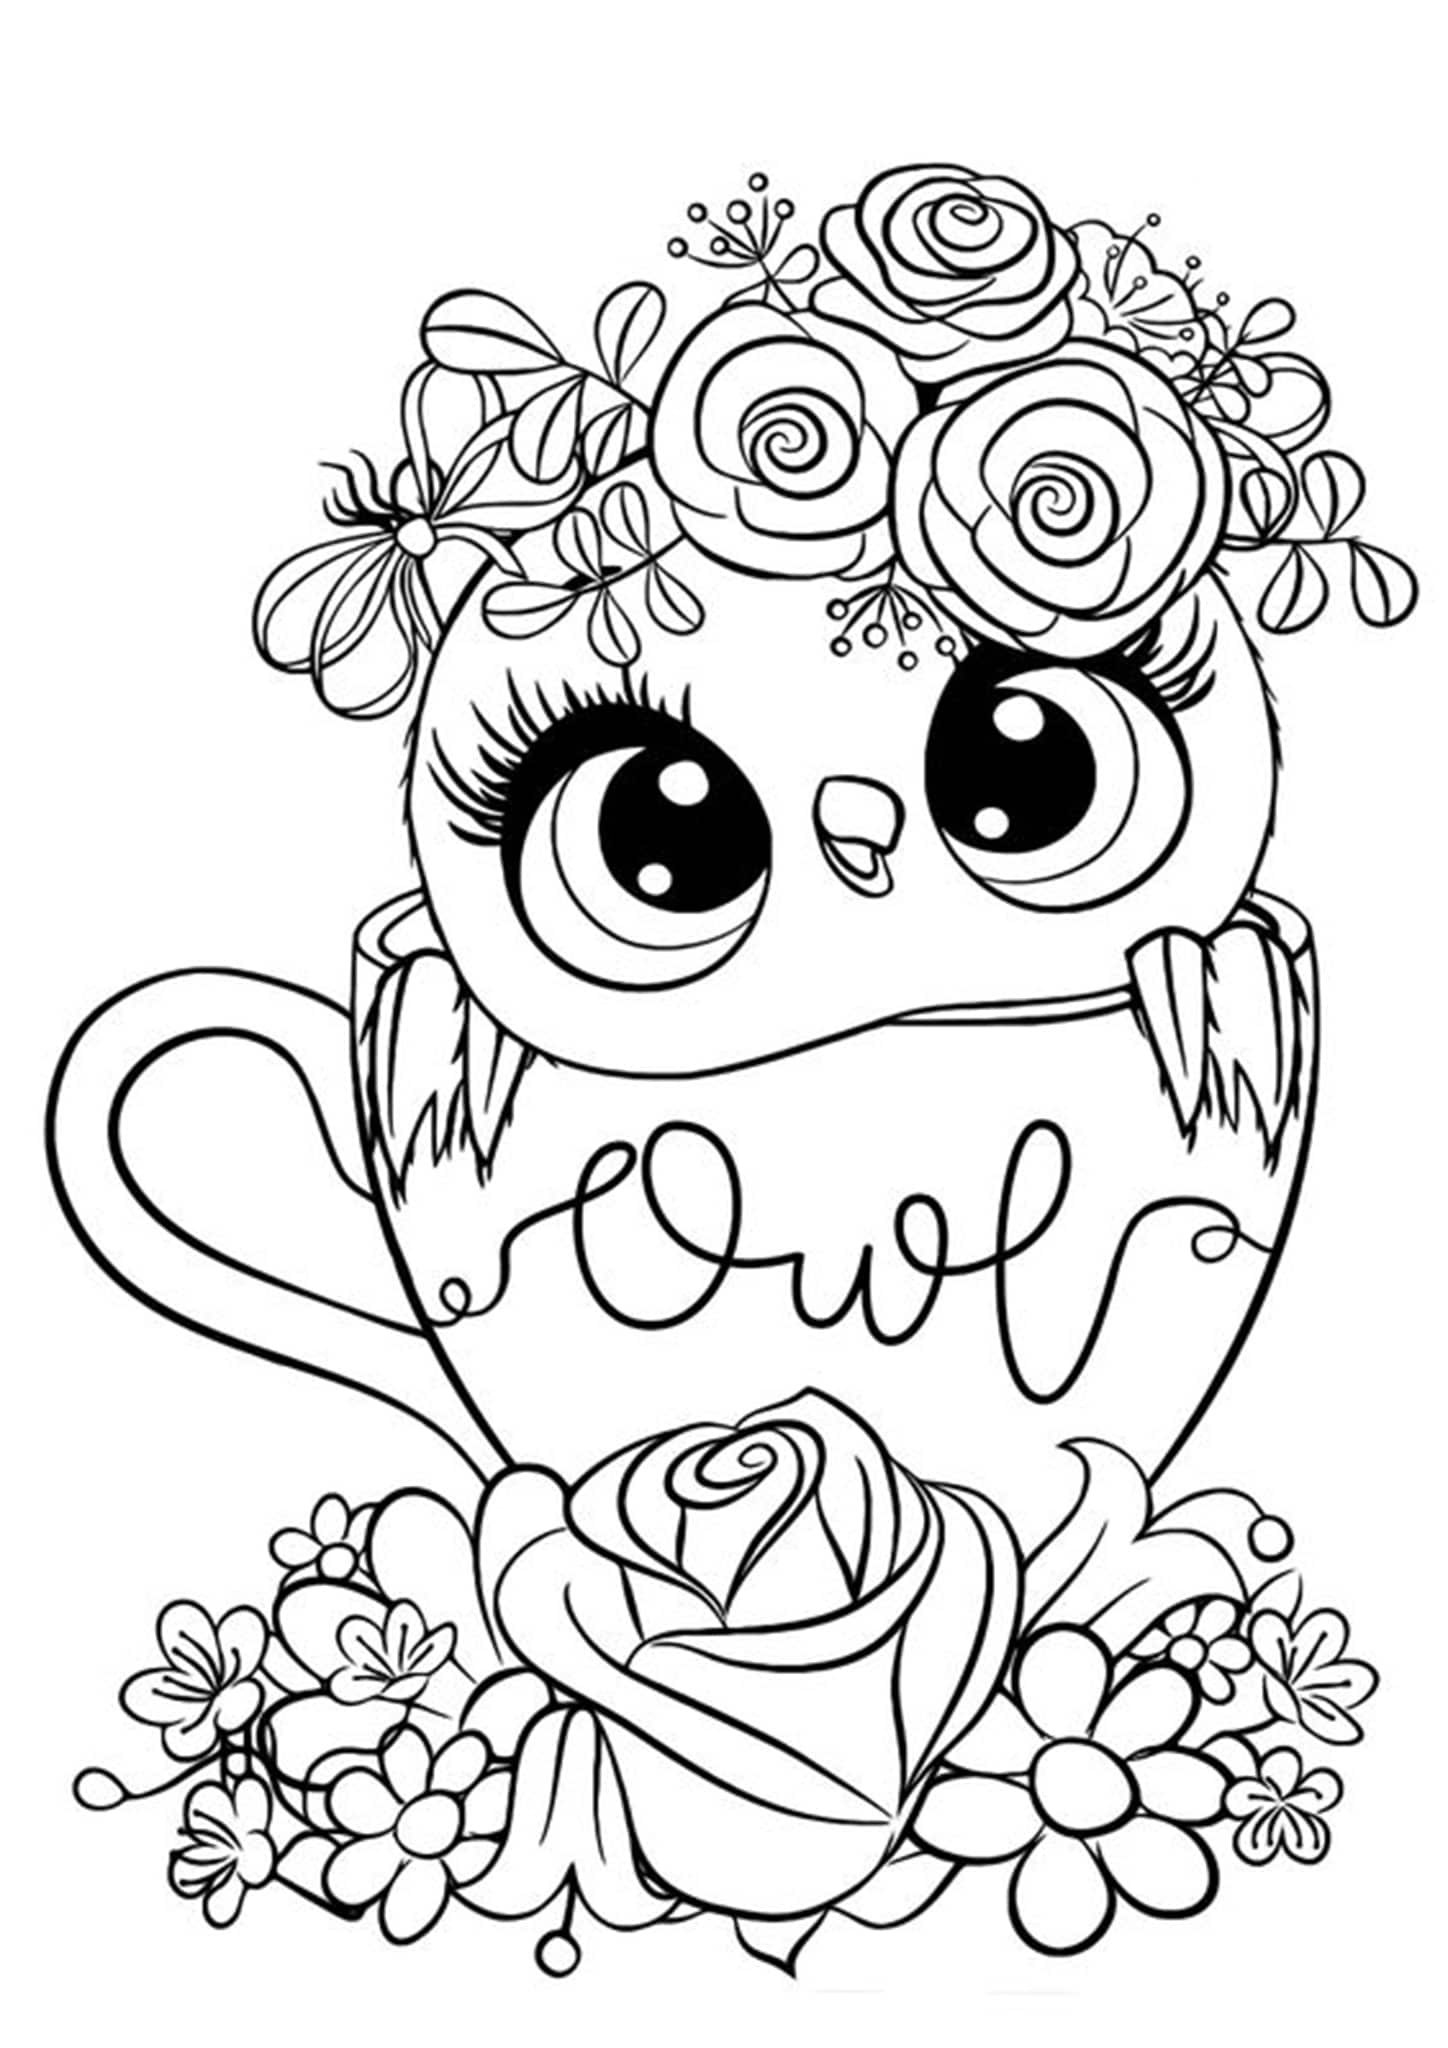 Owl with Flowers para colorir